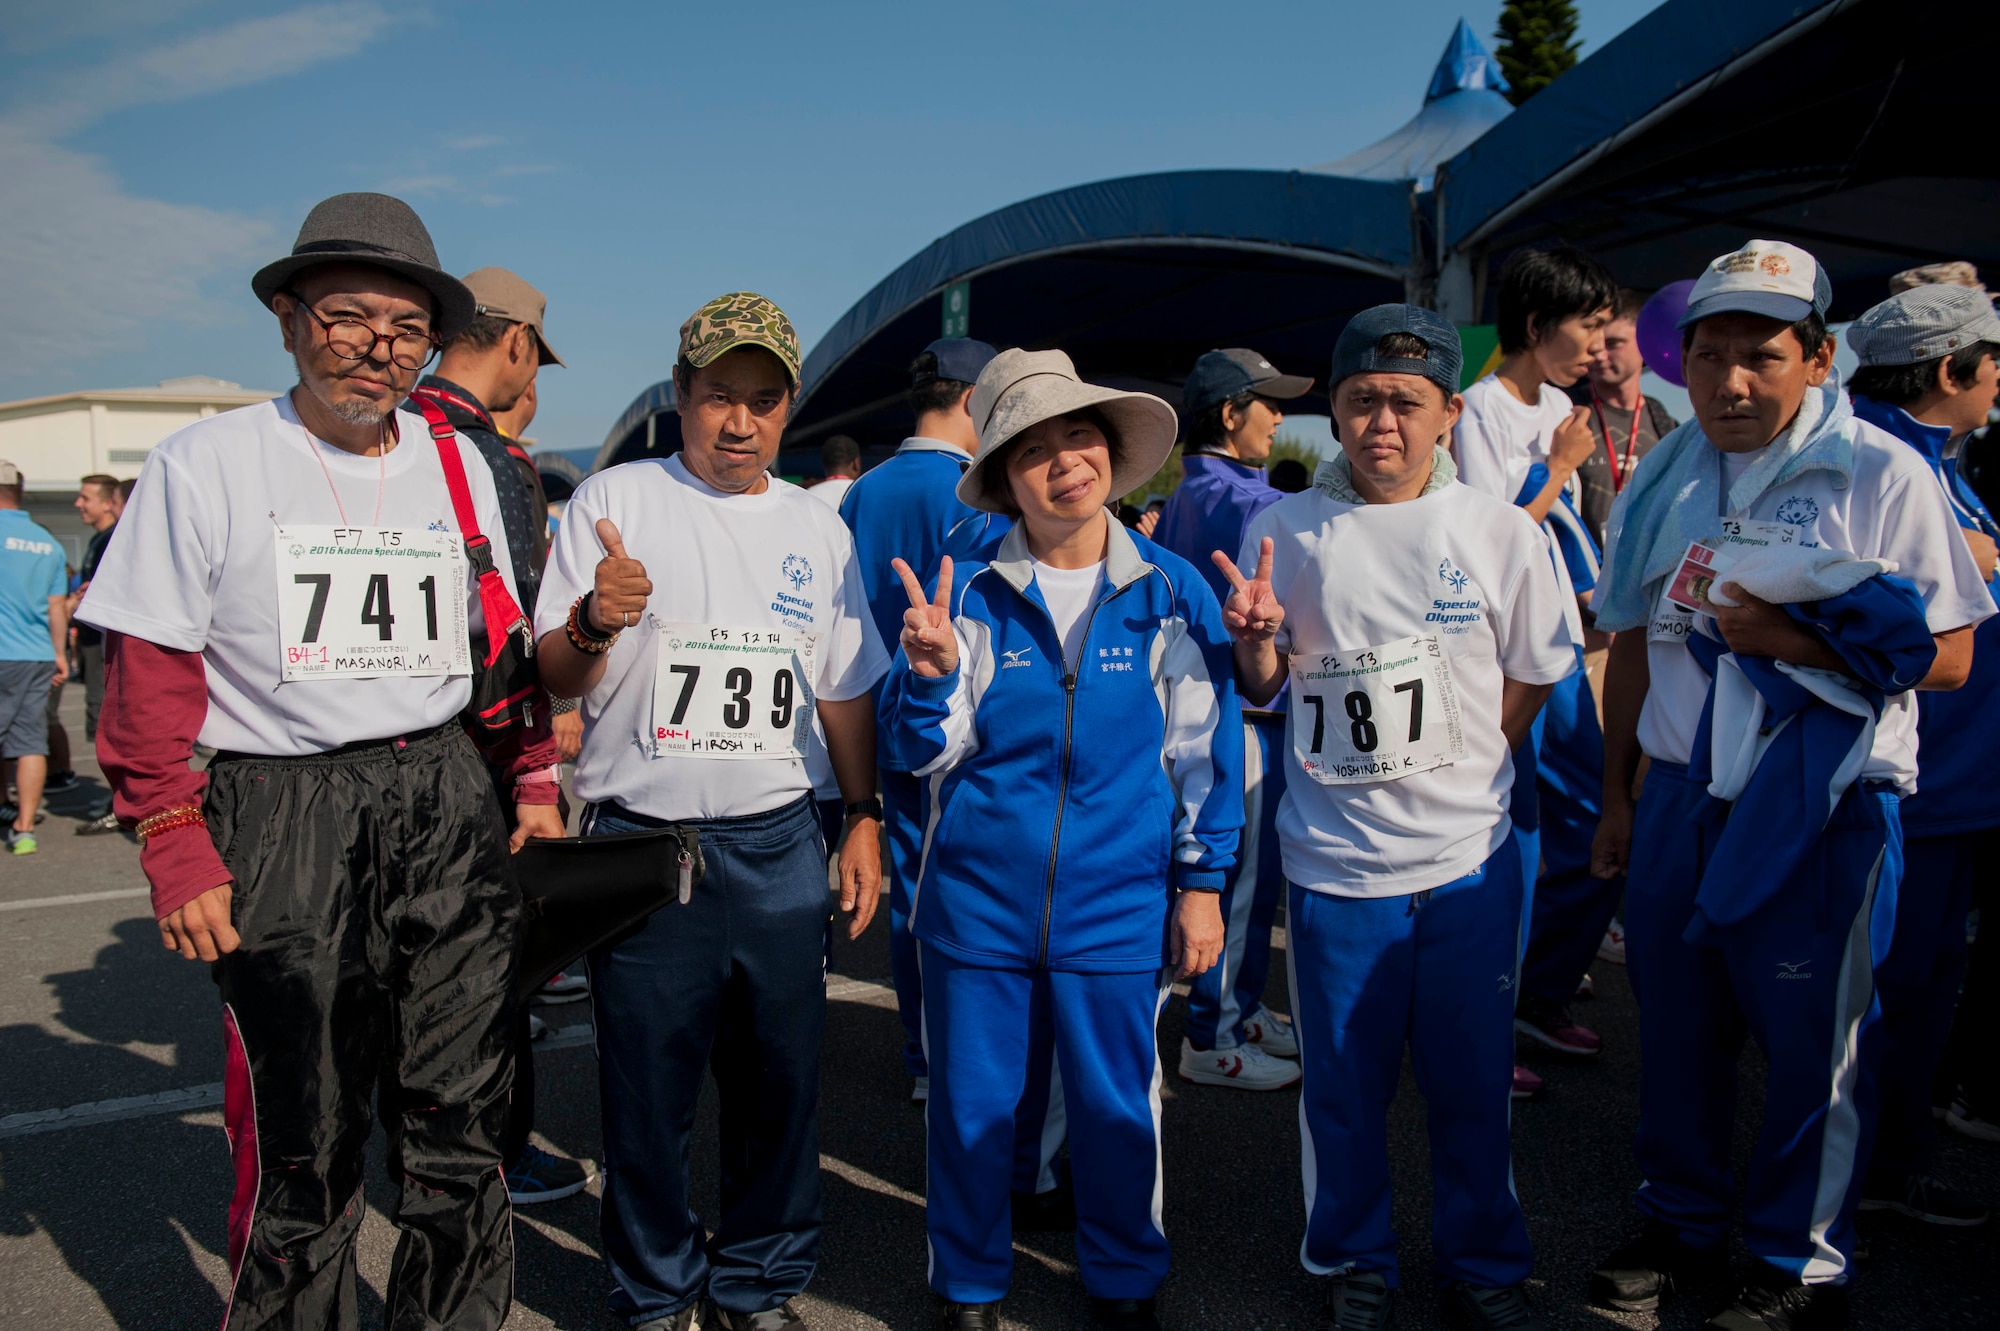 Kadena Special Olympics athletes gather at the greeting area to pair up with Brave Buddies Nov. 5, 2016, at Kadena Air Base, Japan. Brave Buddies, who are U.S. volunteers, supported and assisted each athlete’s needs throughout various sporting events and entertainment activities. (U.S. Air Force photo by Senior Airman Peter Reft/Released)